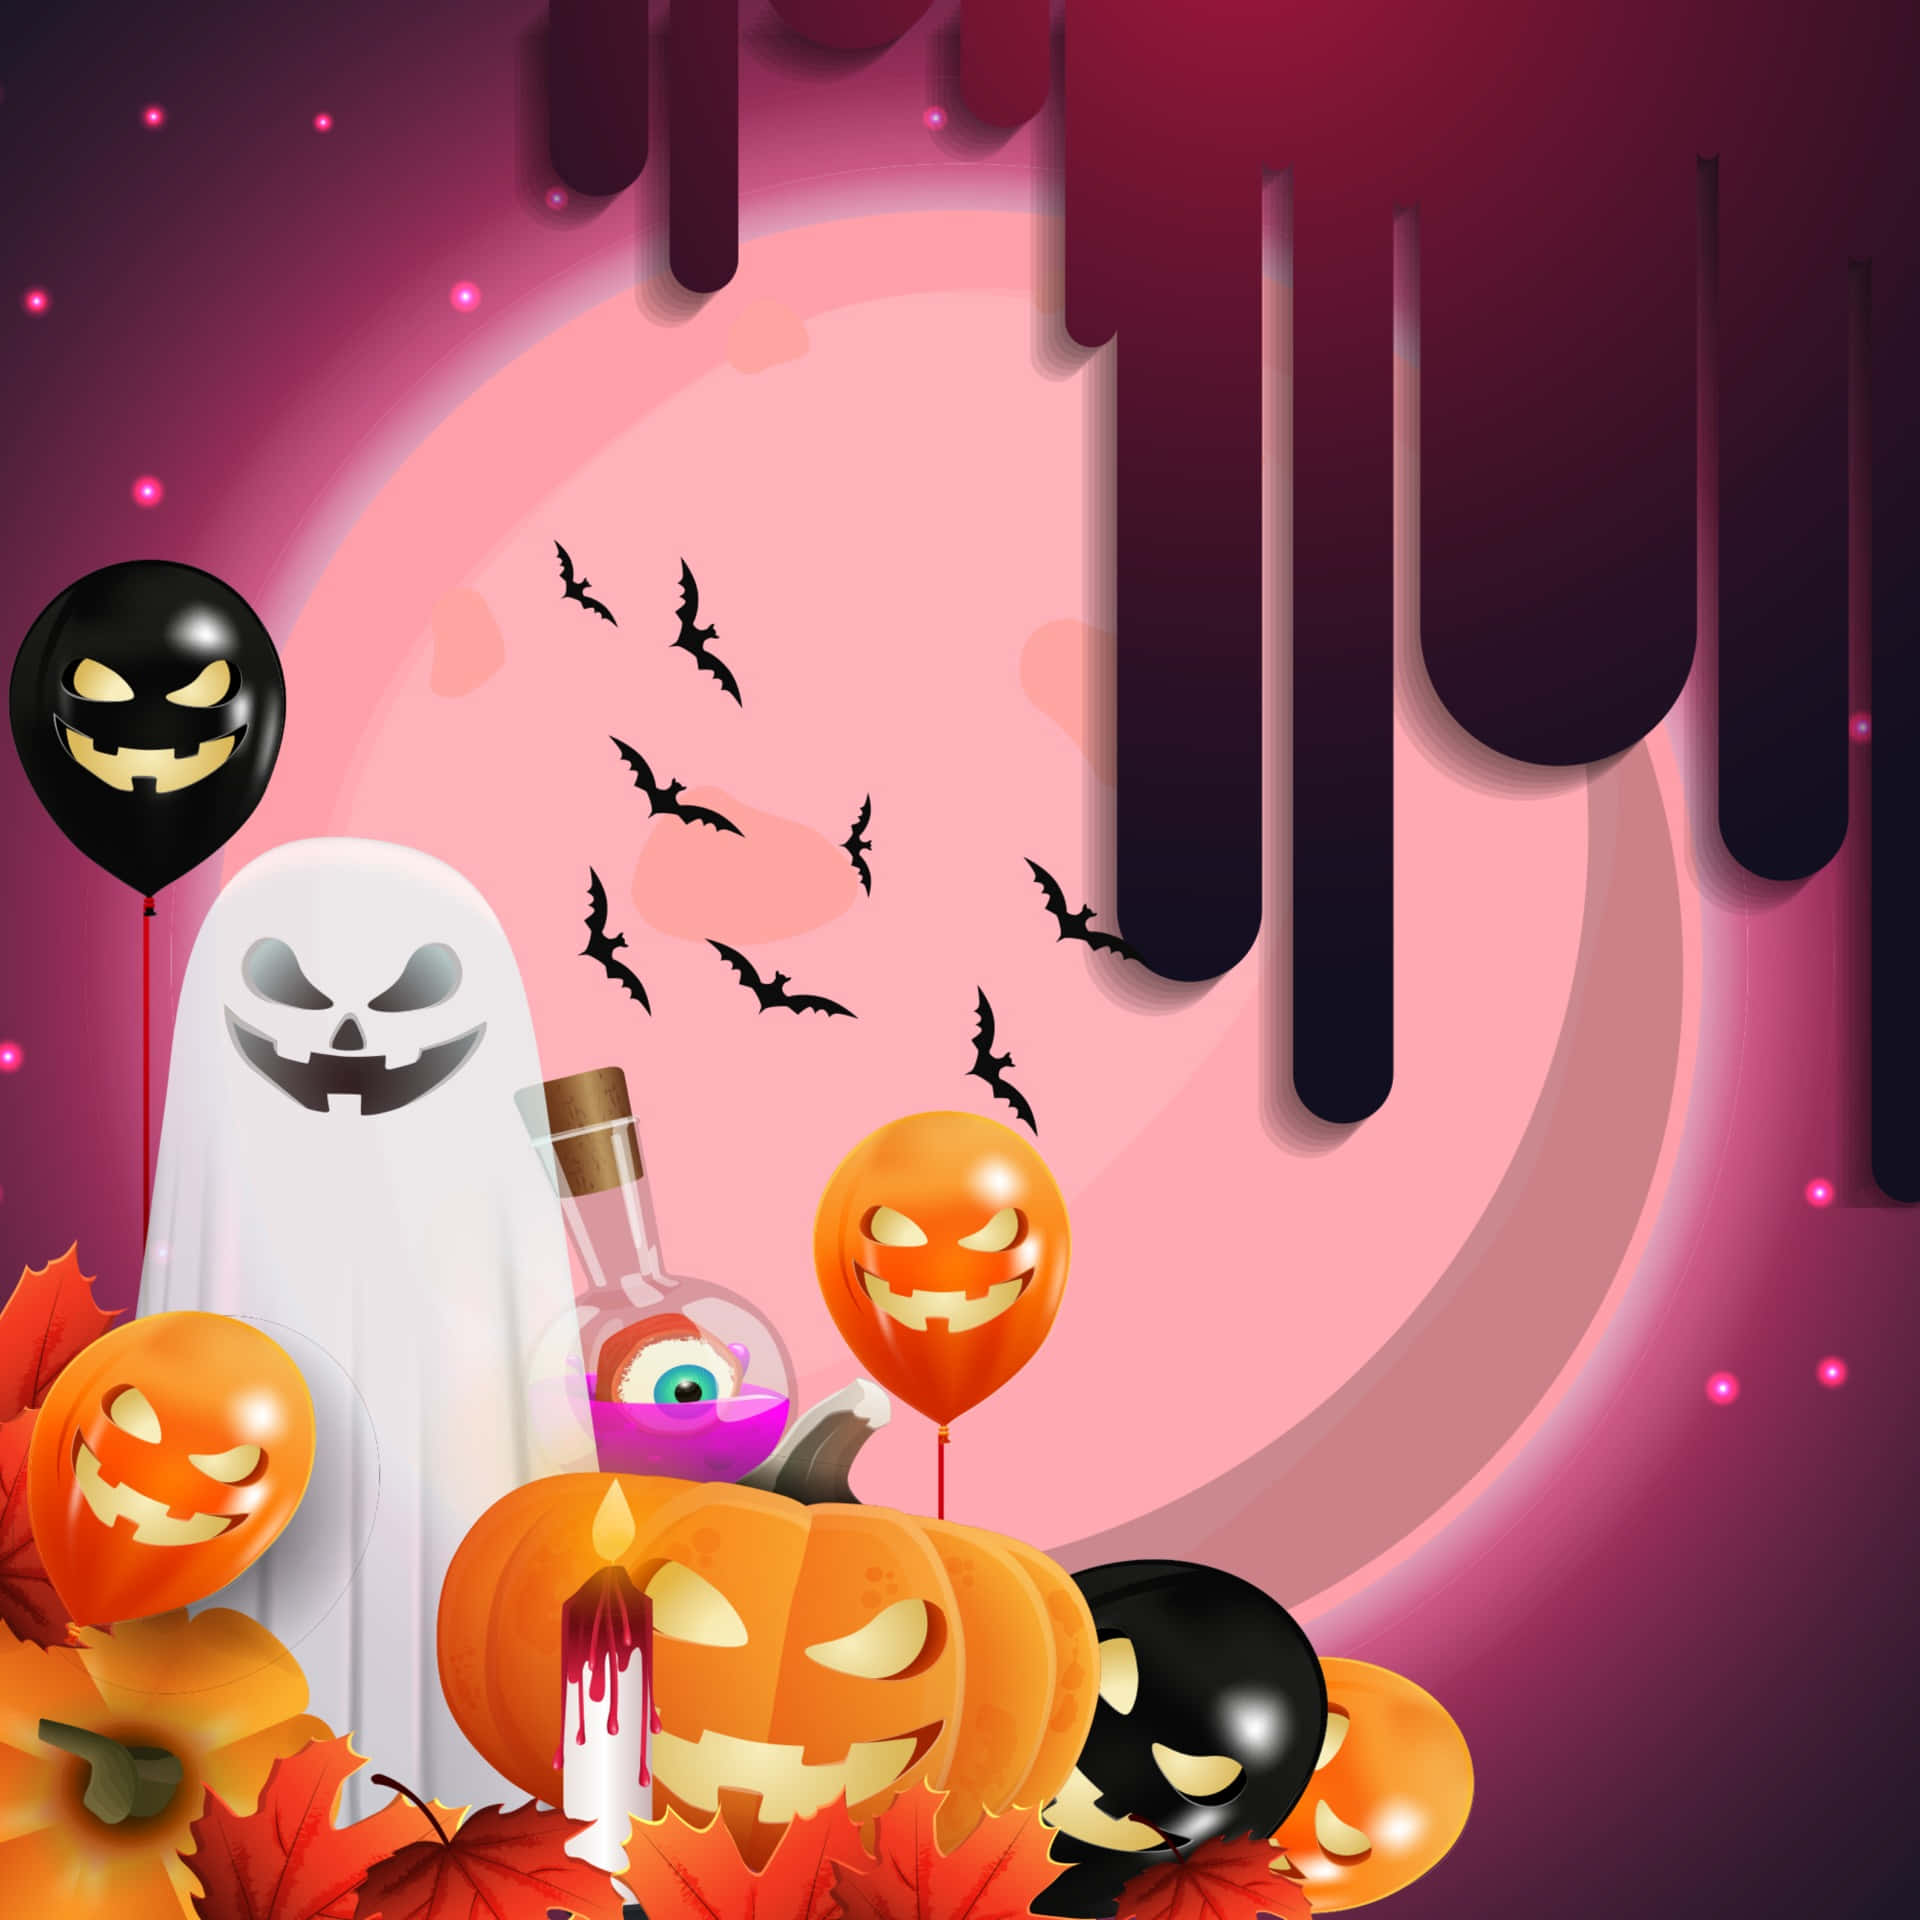 Download Halloween Background With Ghosts, Pumpkins And Balloons ...